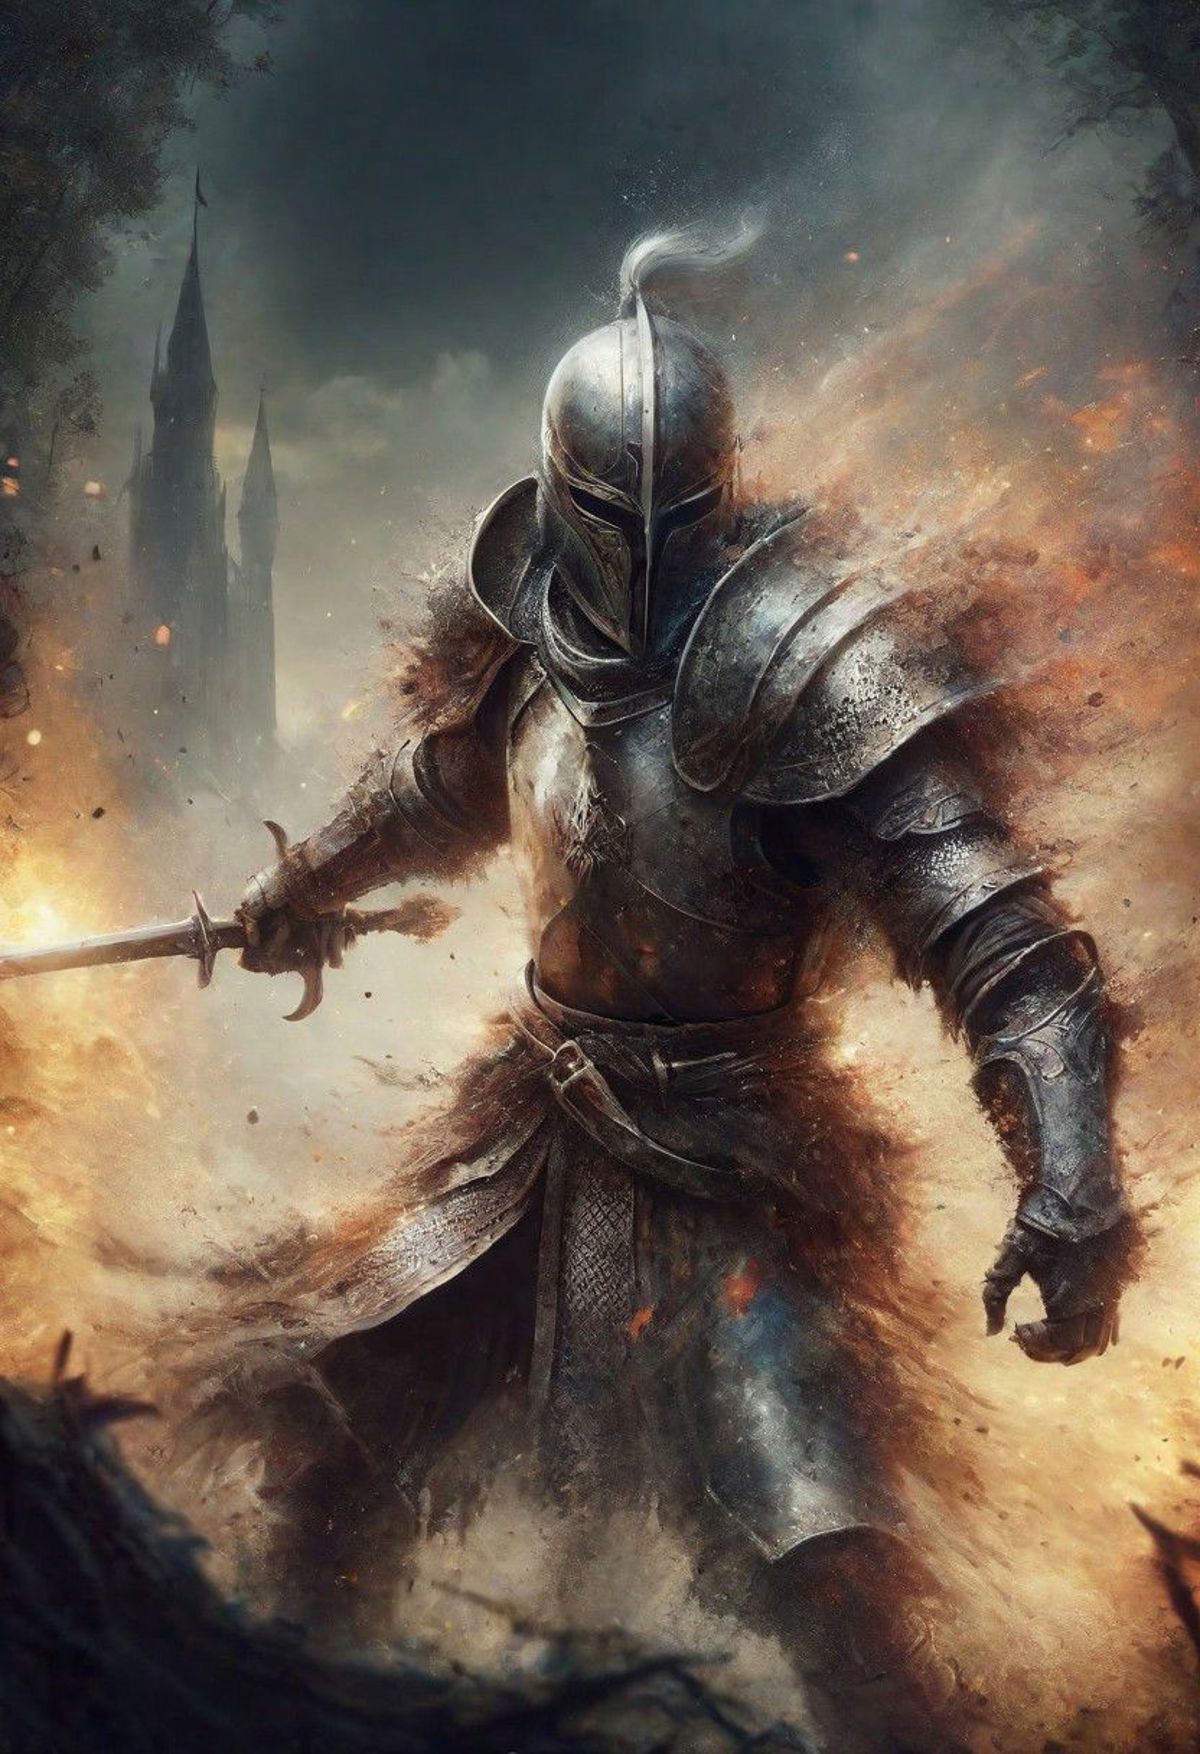 A warrior in a metal suit with a sword and a shield, standing in front of a castle.